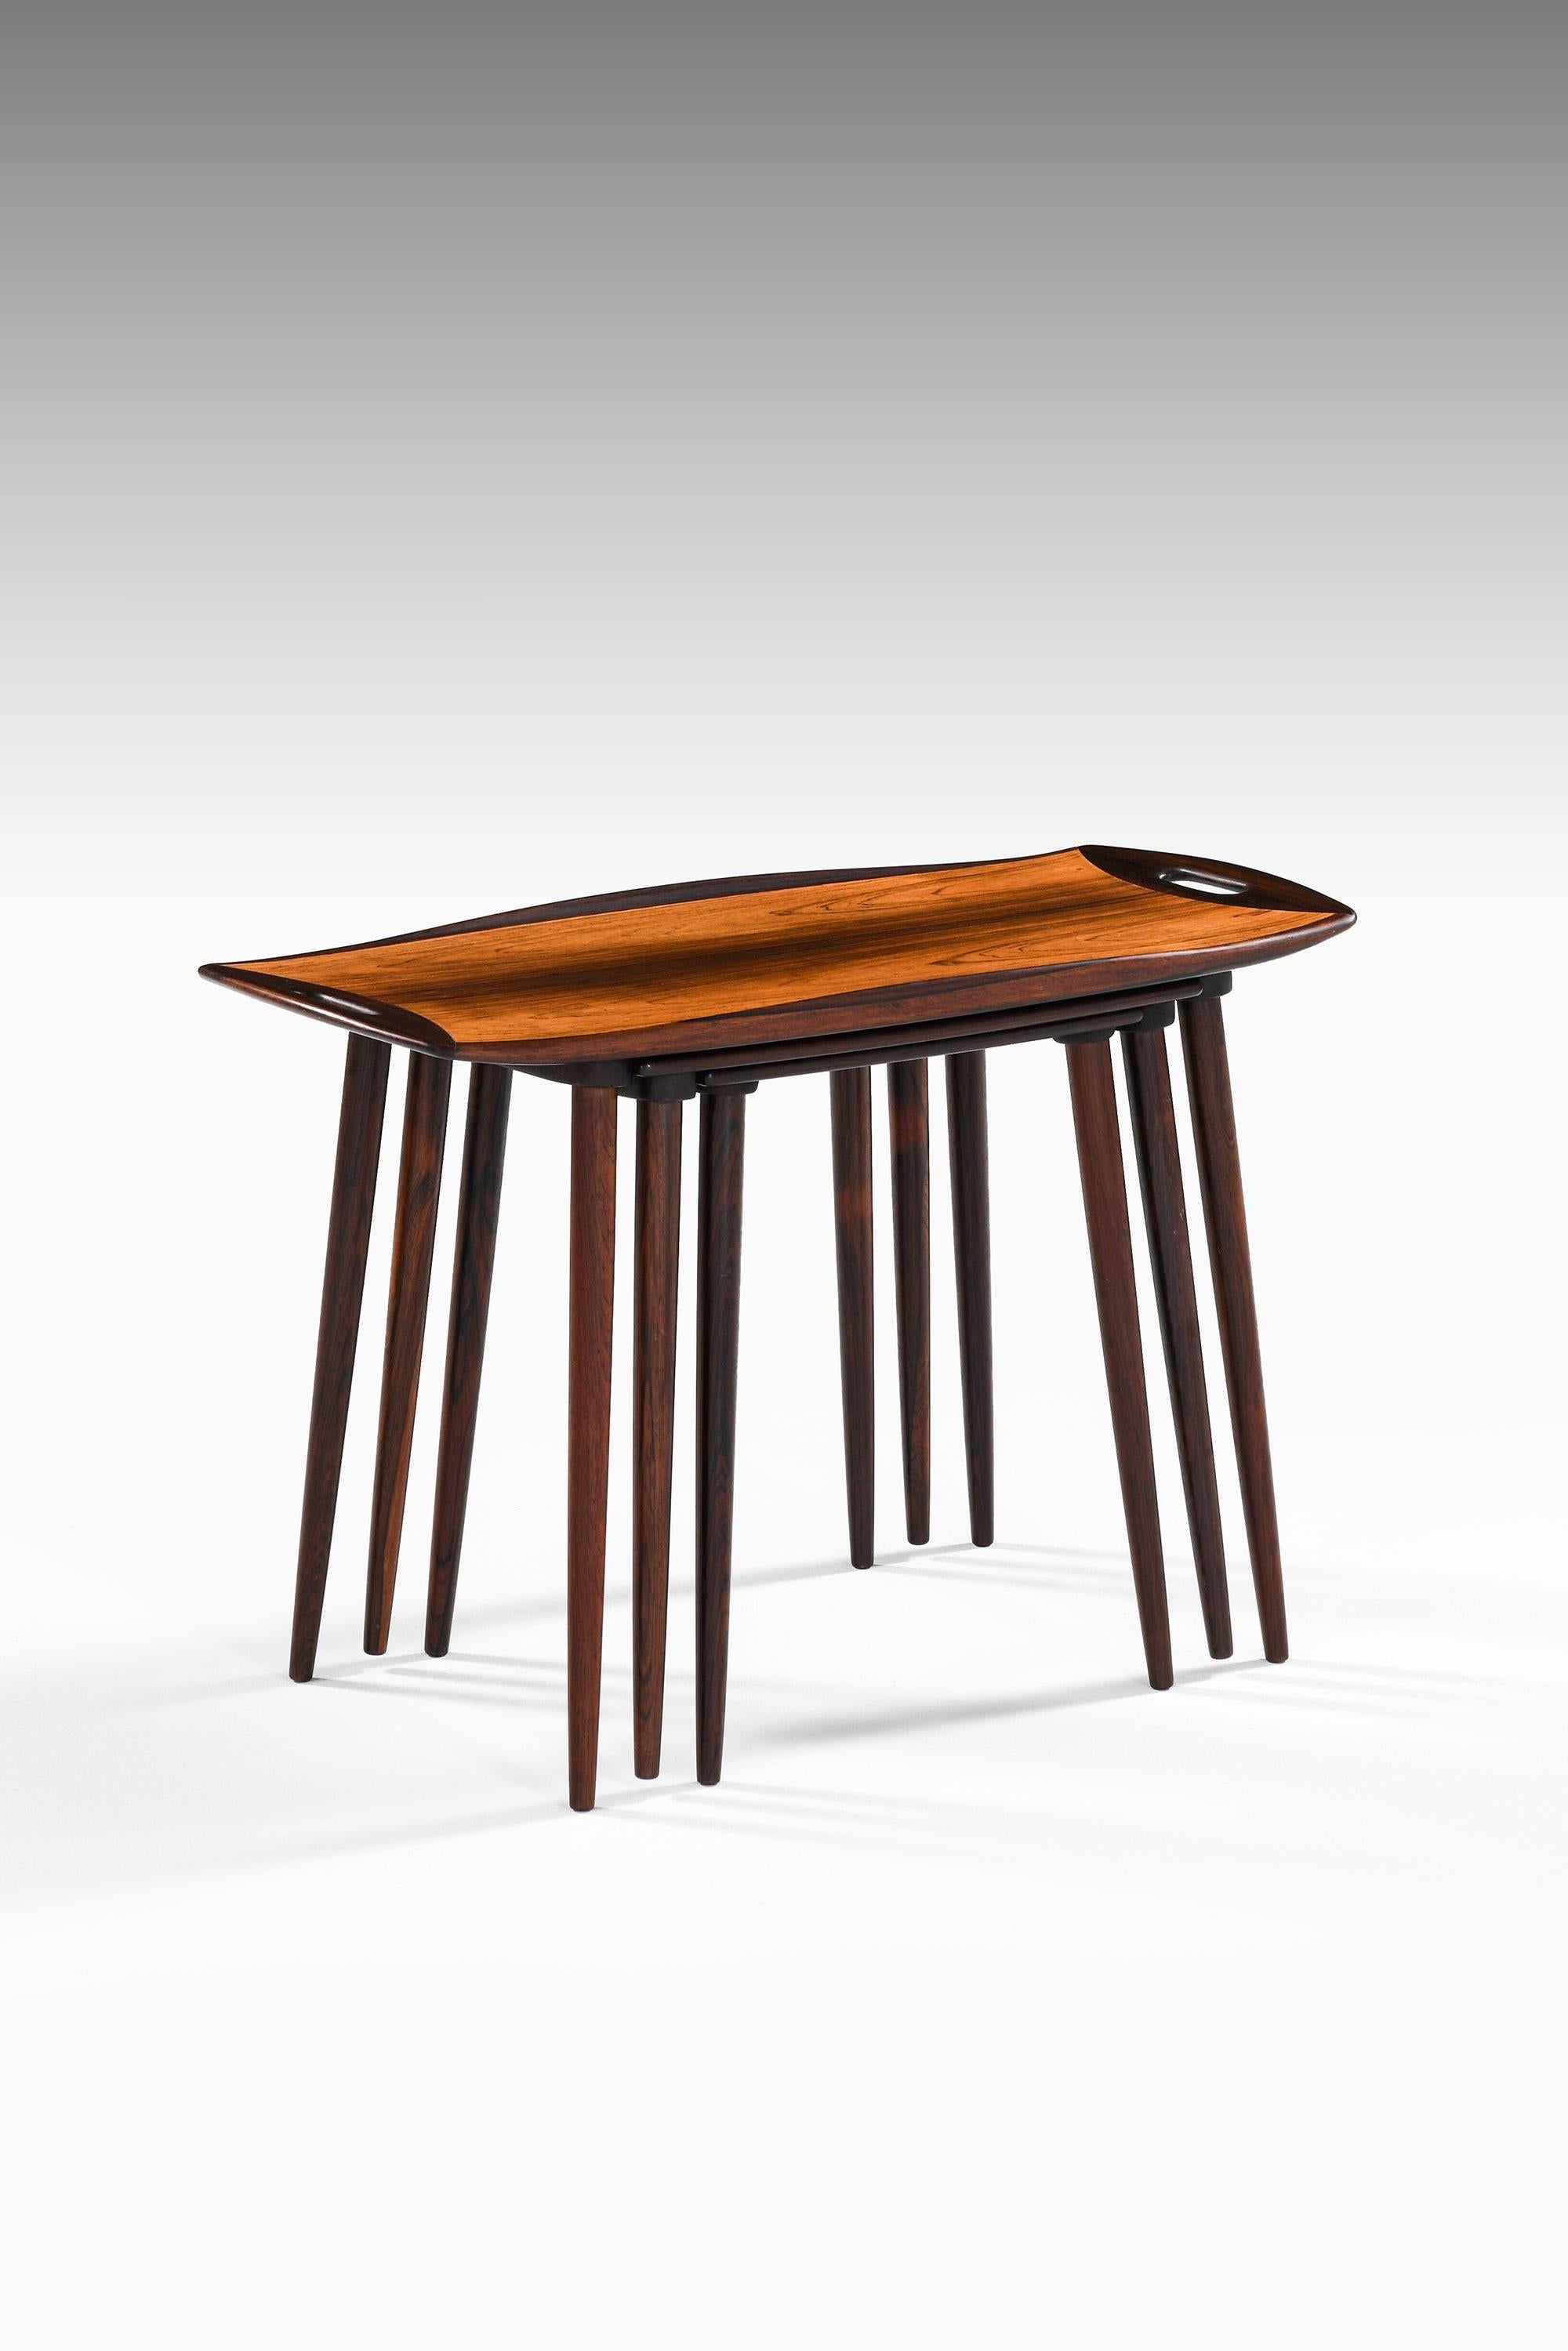 Scandinavian Modern Nesting Tables in Rosewood by Jens Quistgaard, 1964 For Sale